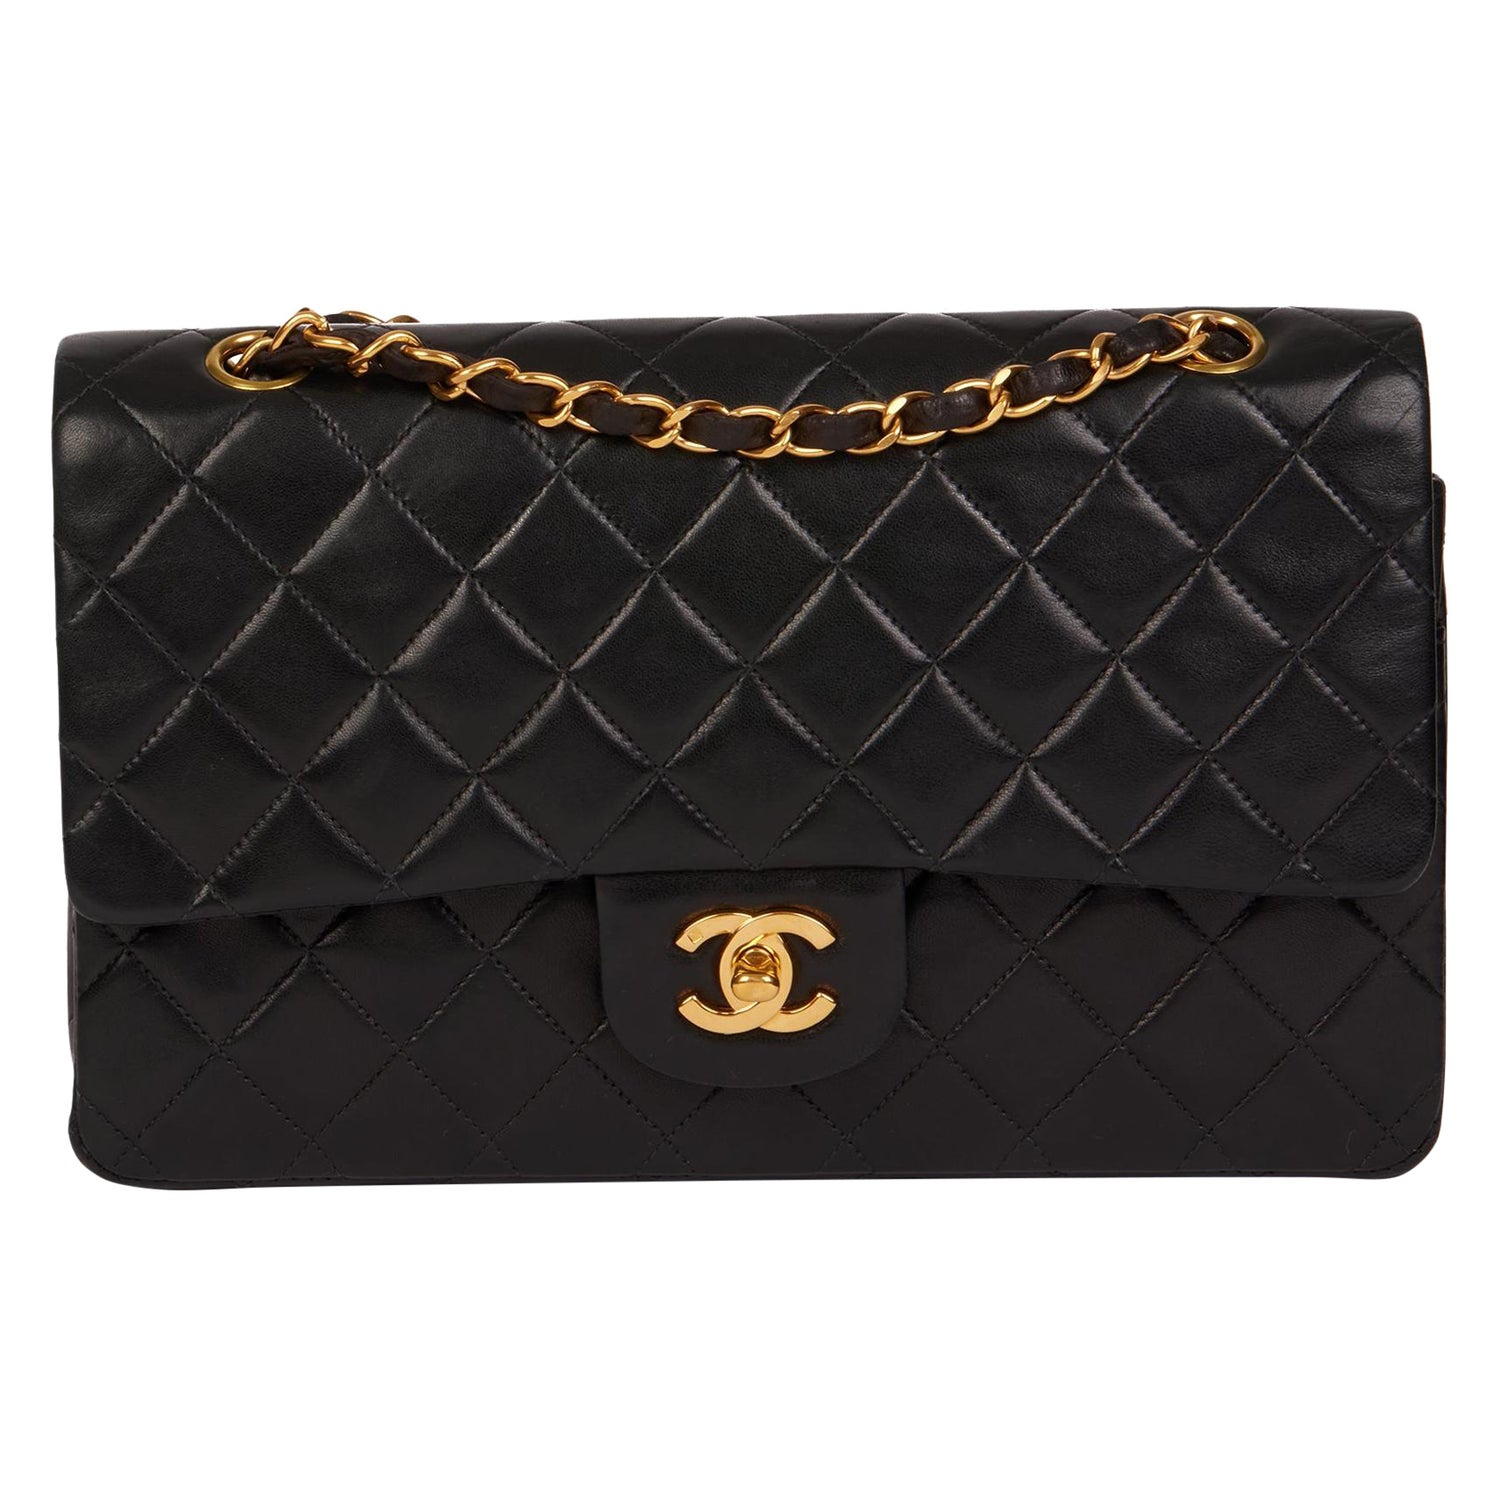 CHANEL Beige Quilted Lambskin Vintage Square Mini Flap Bag For